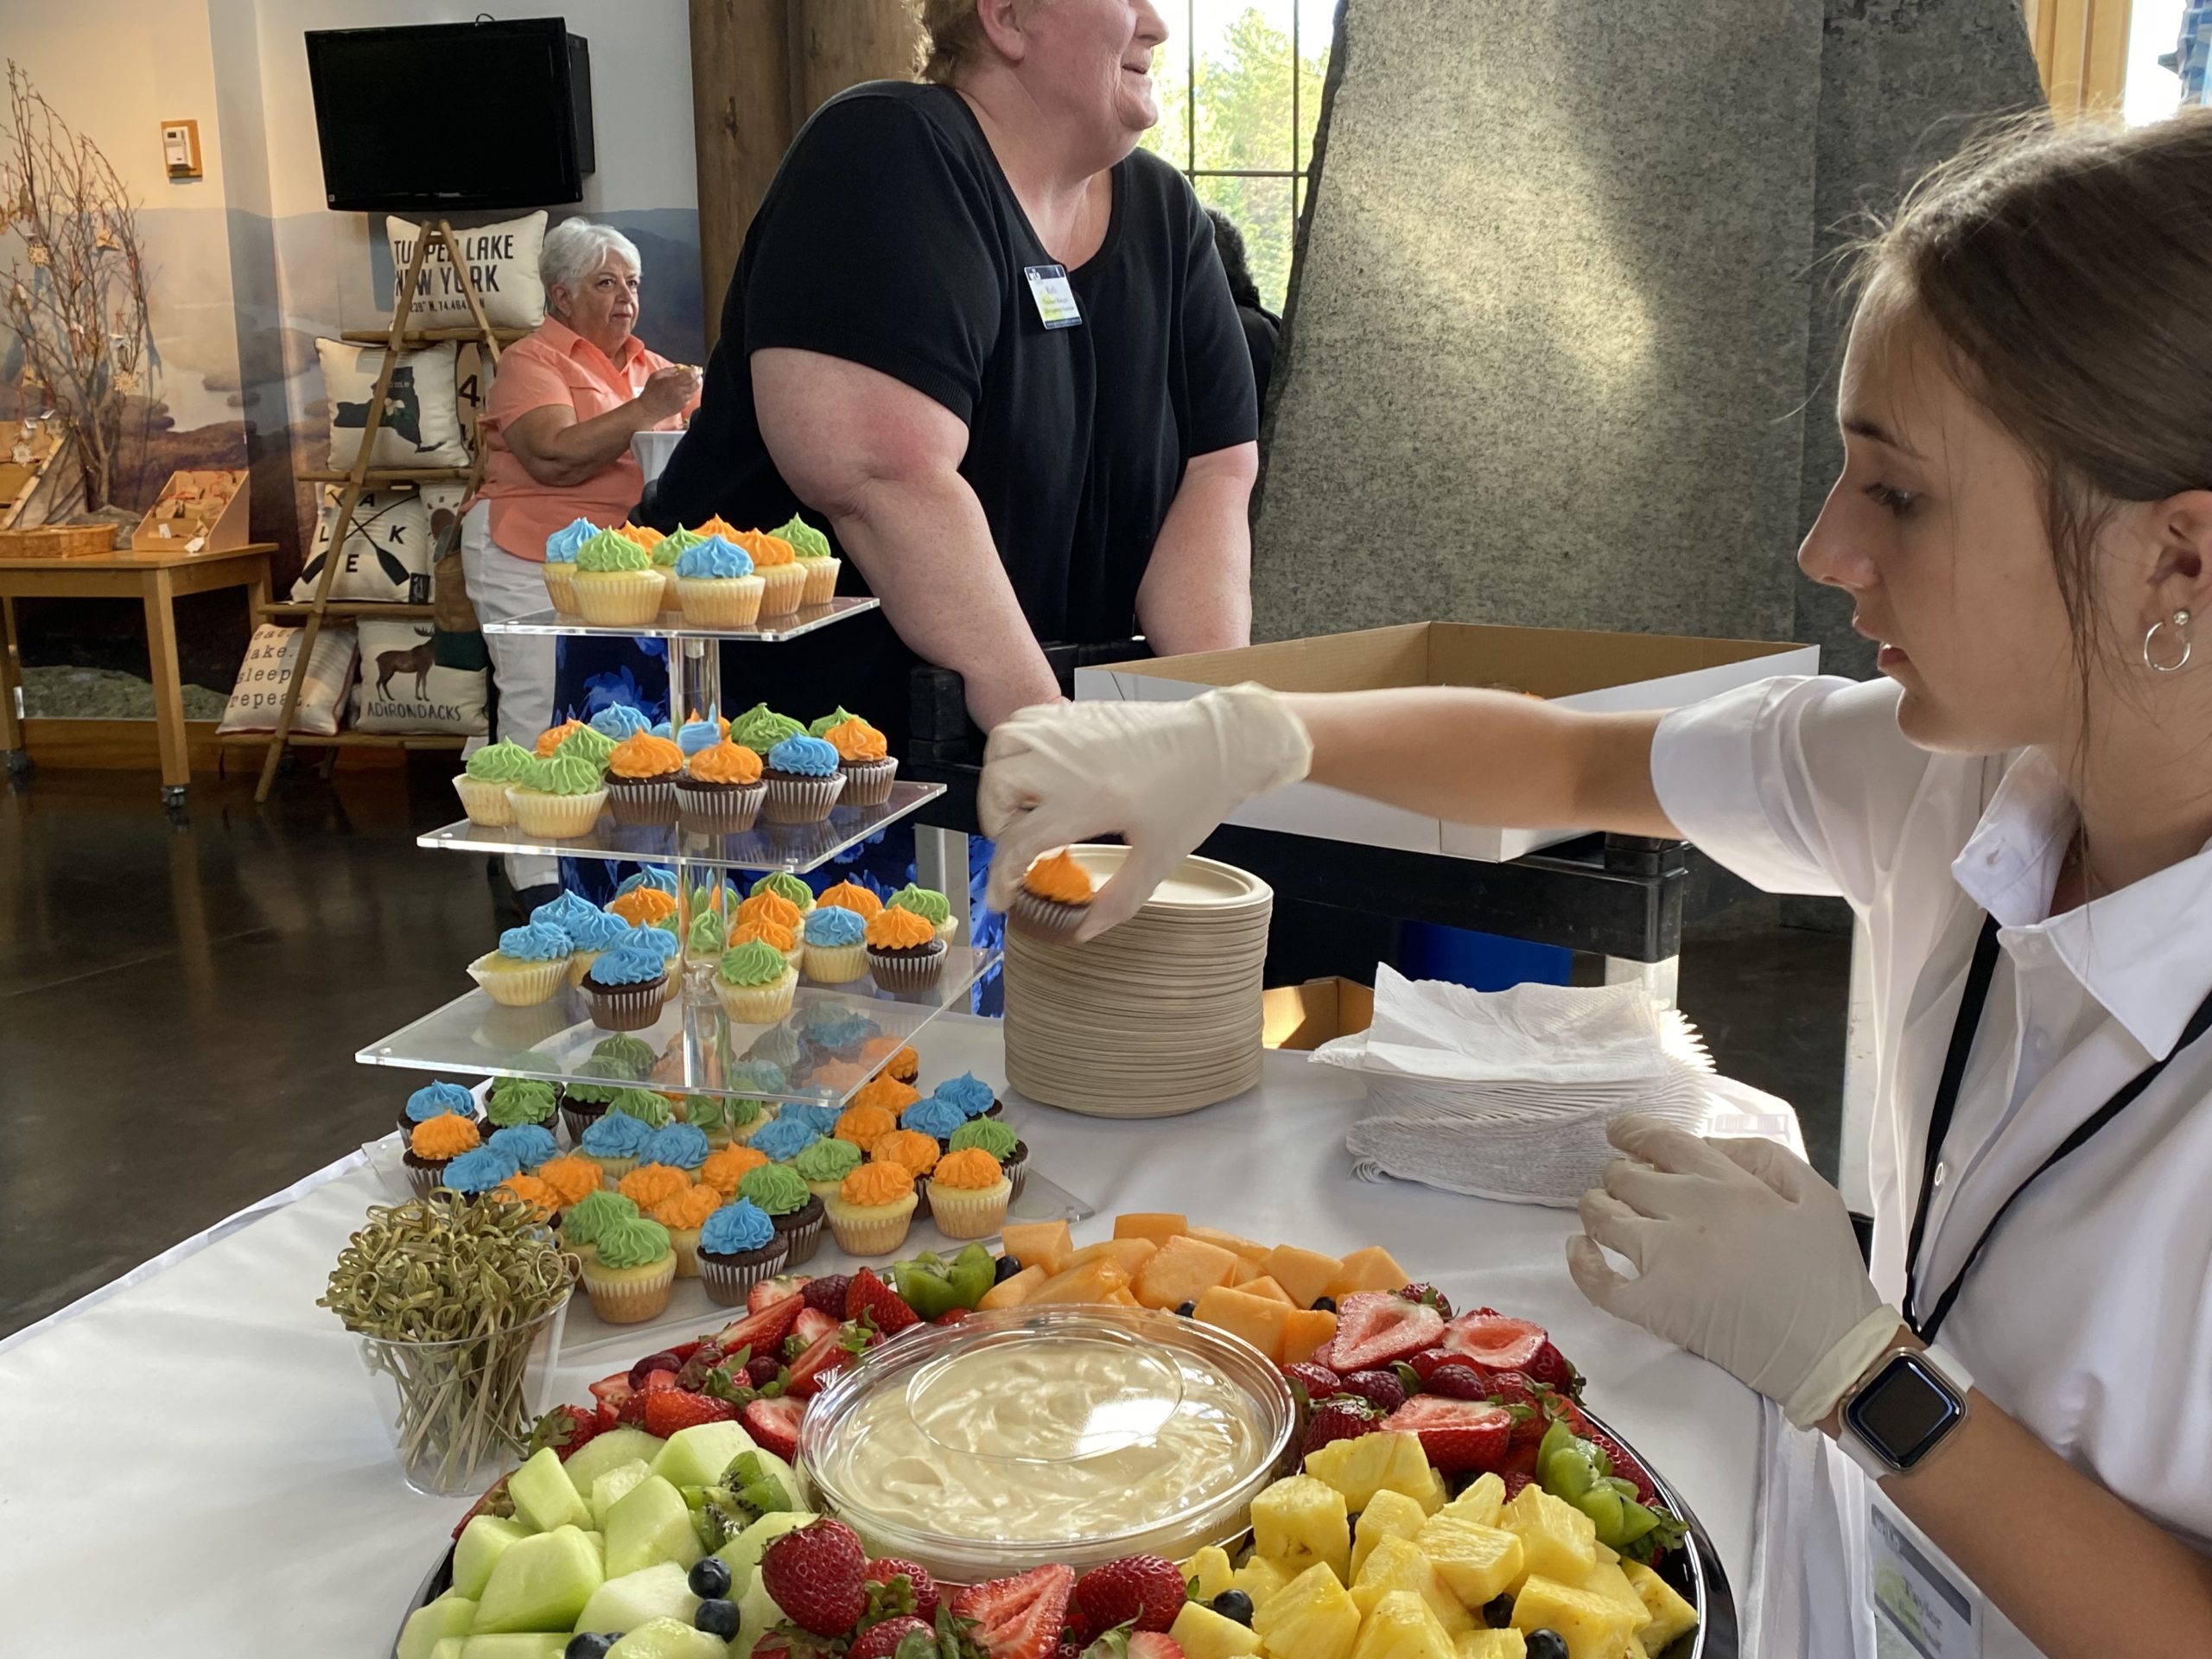 Image of snack table and multi-colored cupcakes